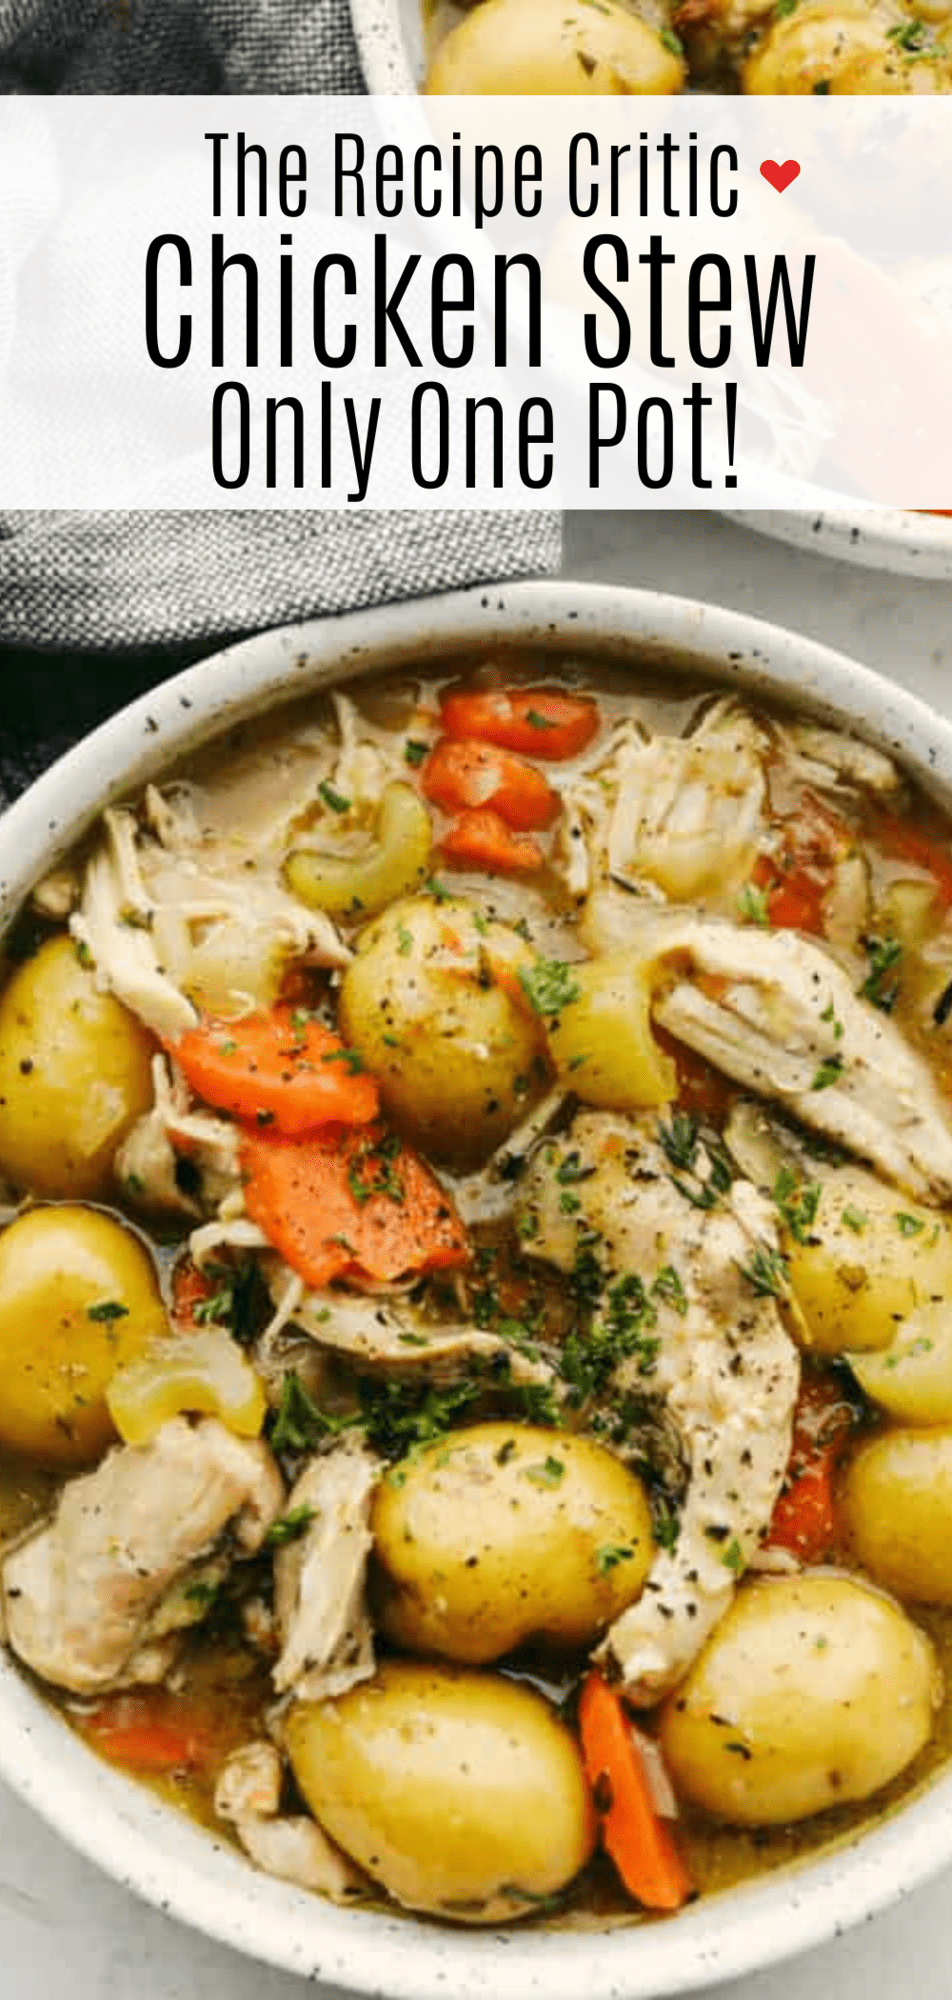 https://therecipecritic.com/wp-content/uploads/2020/09/Chicken-Stew-1.png